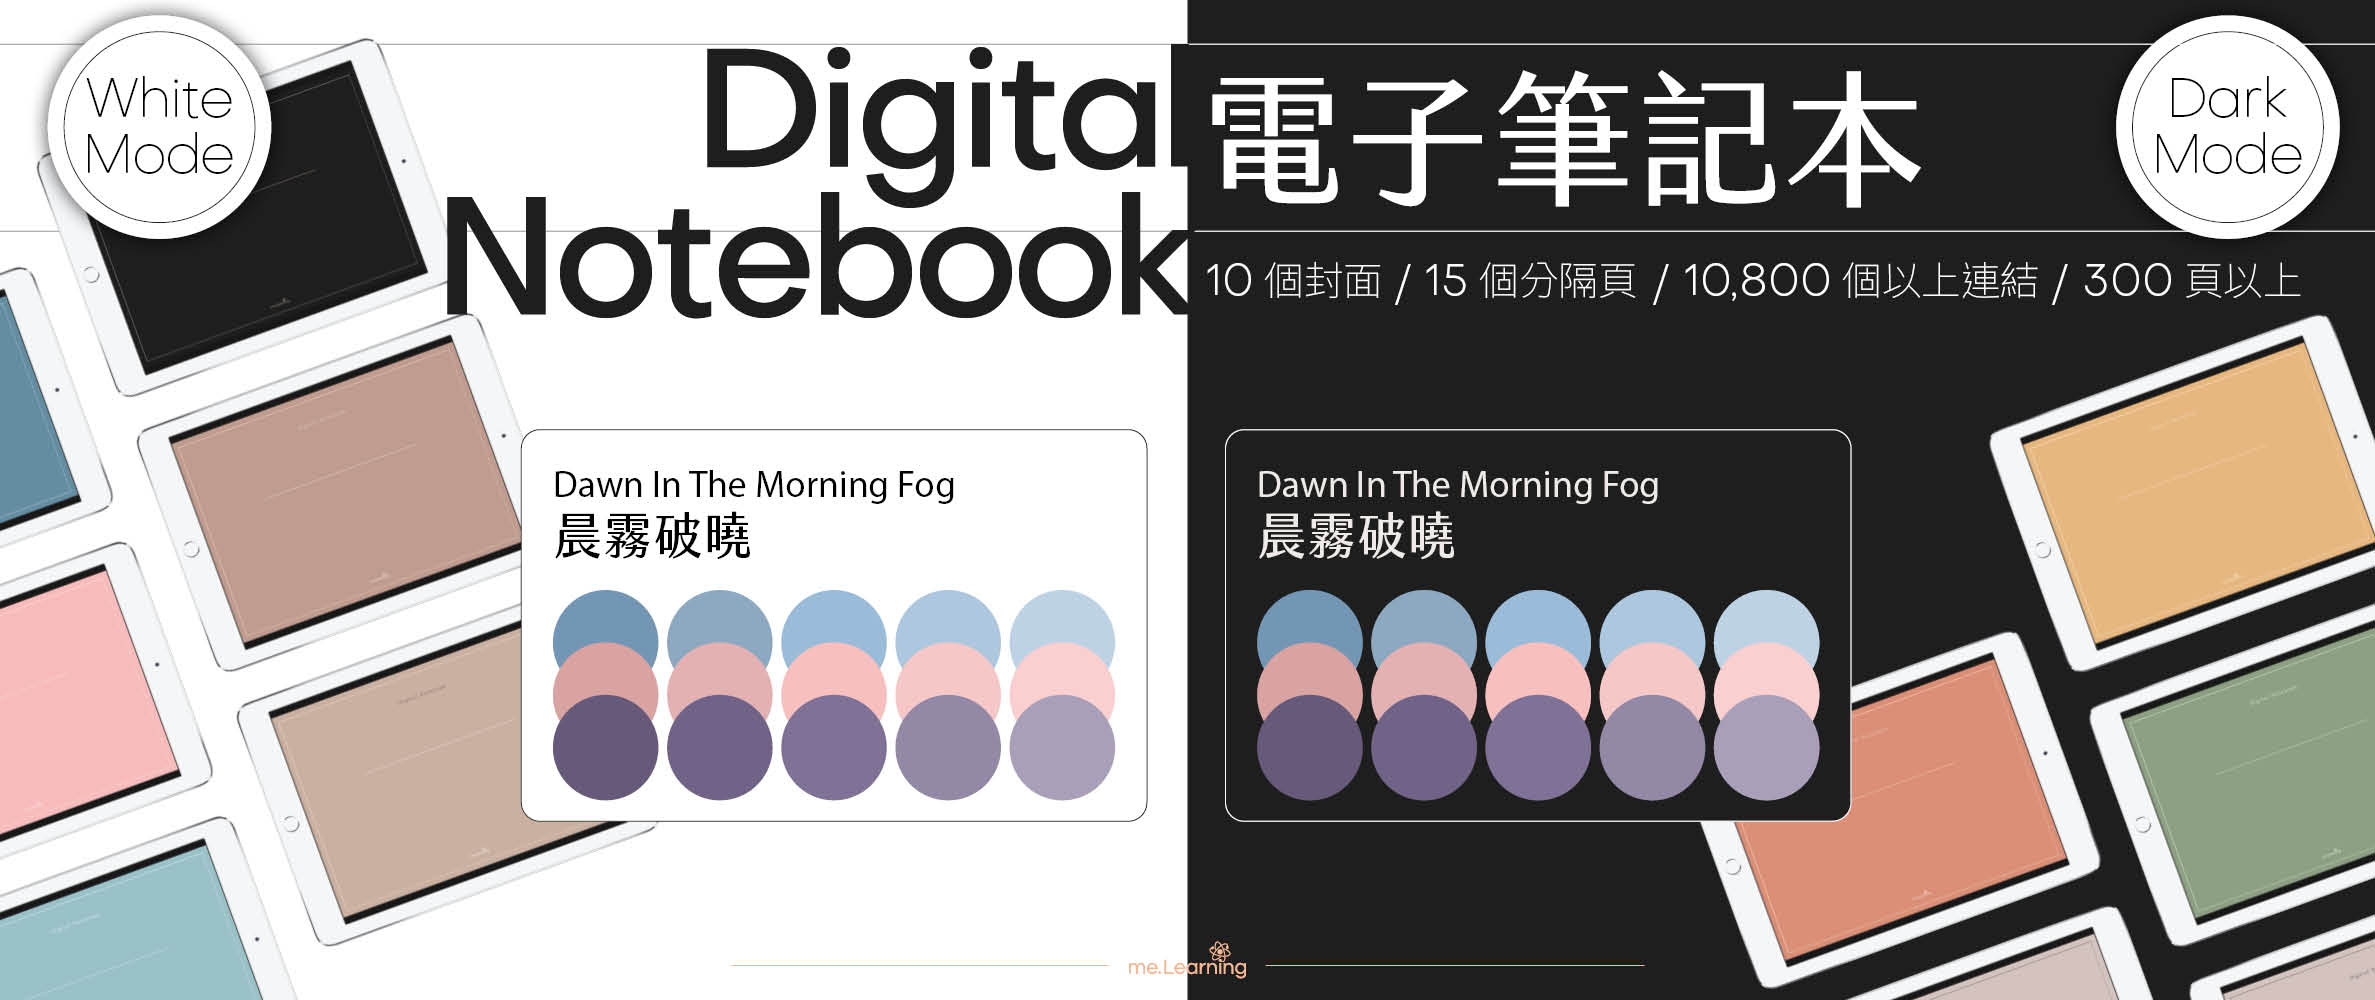 Notebook-Landscape-Solid Color Cover-15 Tabs-Dawn In The Morning Fog-Dark Mode 不想念書時上市 | me.Learning